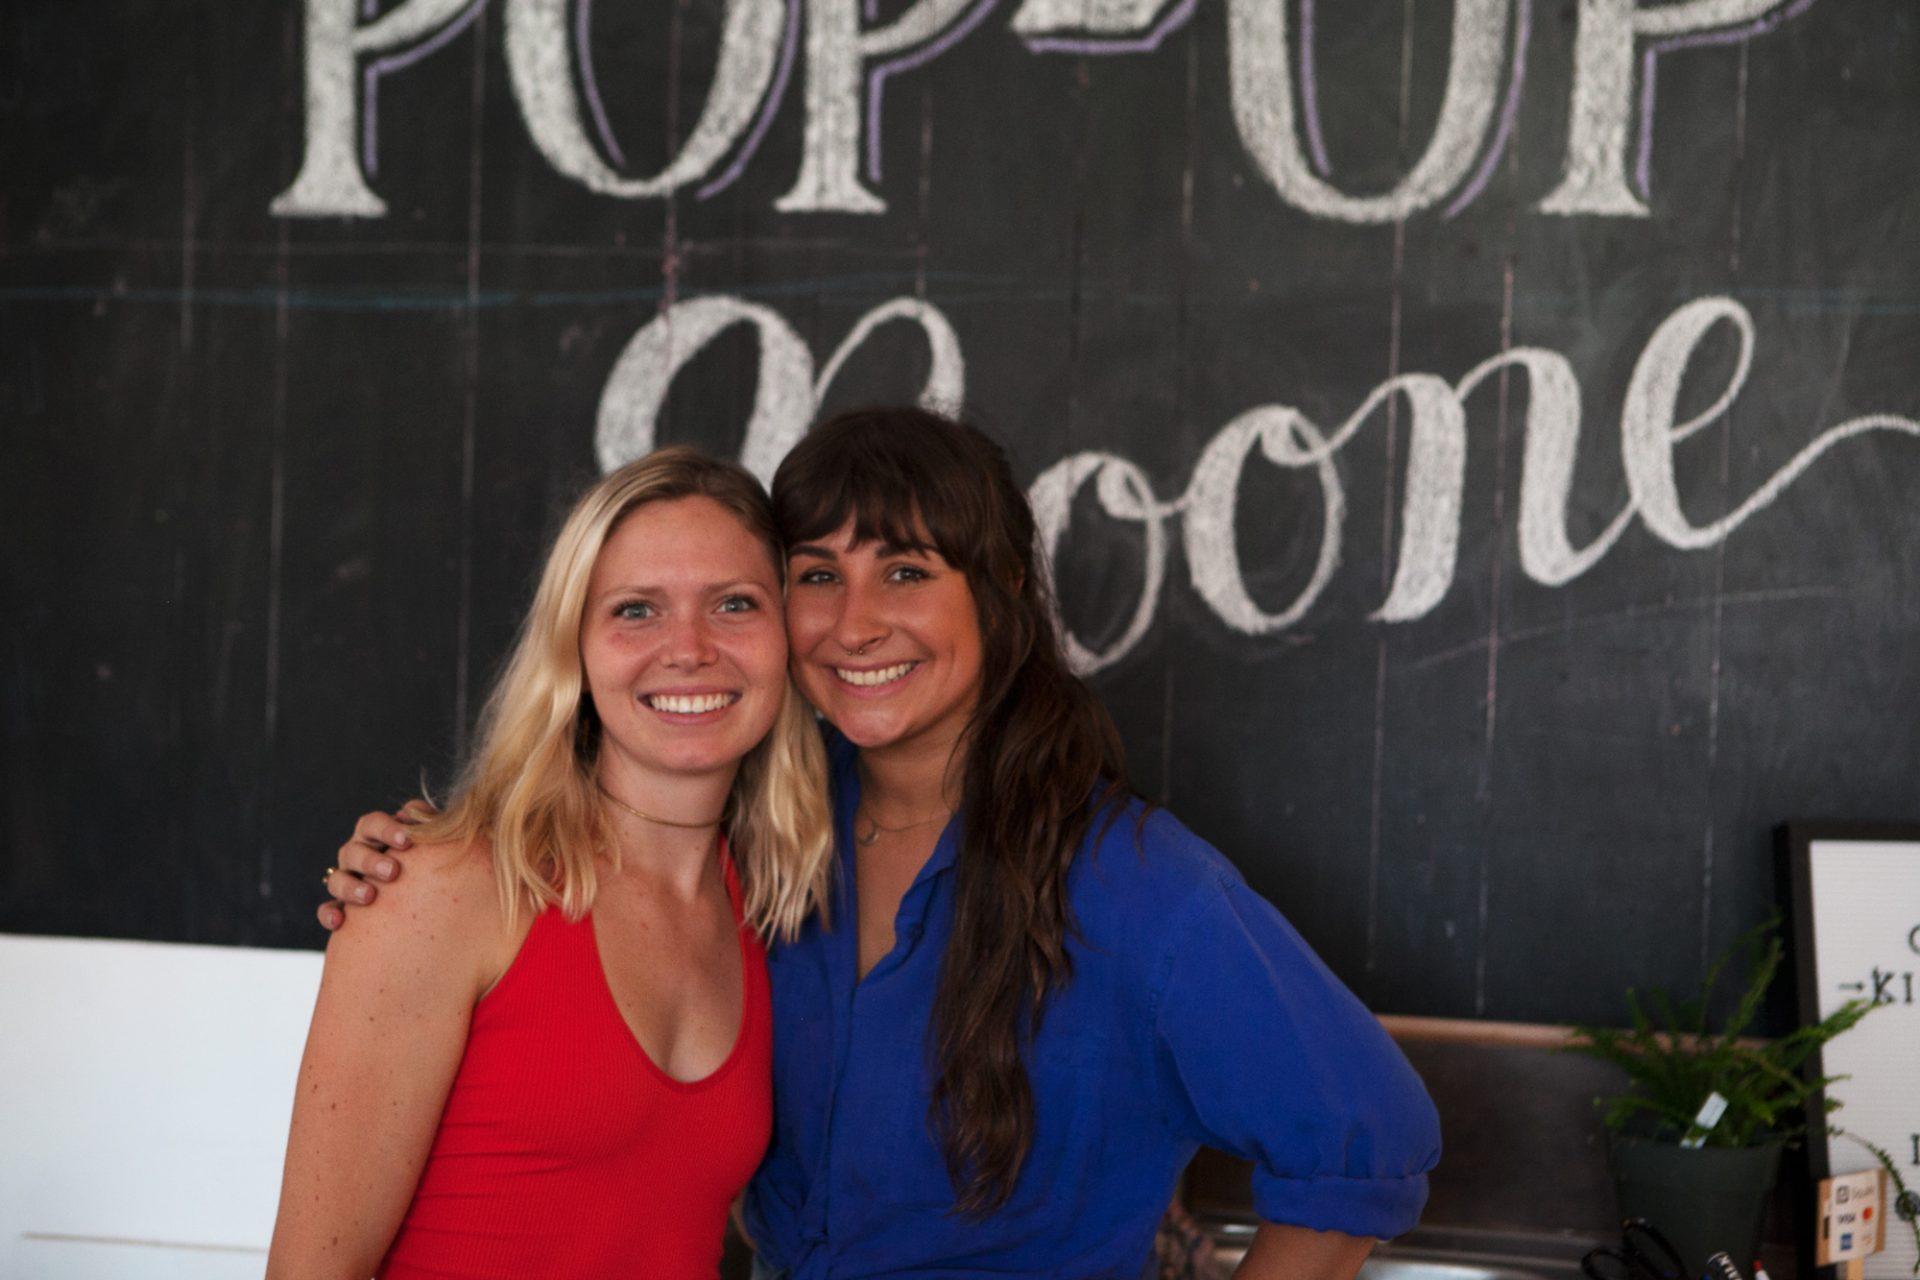 Co-founders of Pop Up Boone, Megan Kelley and ???